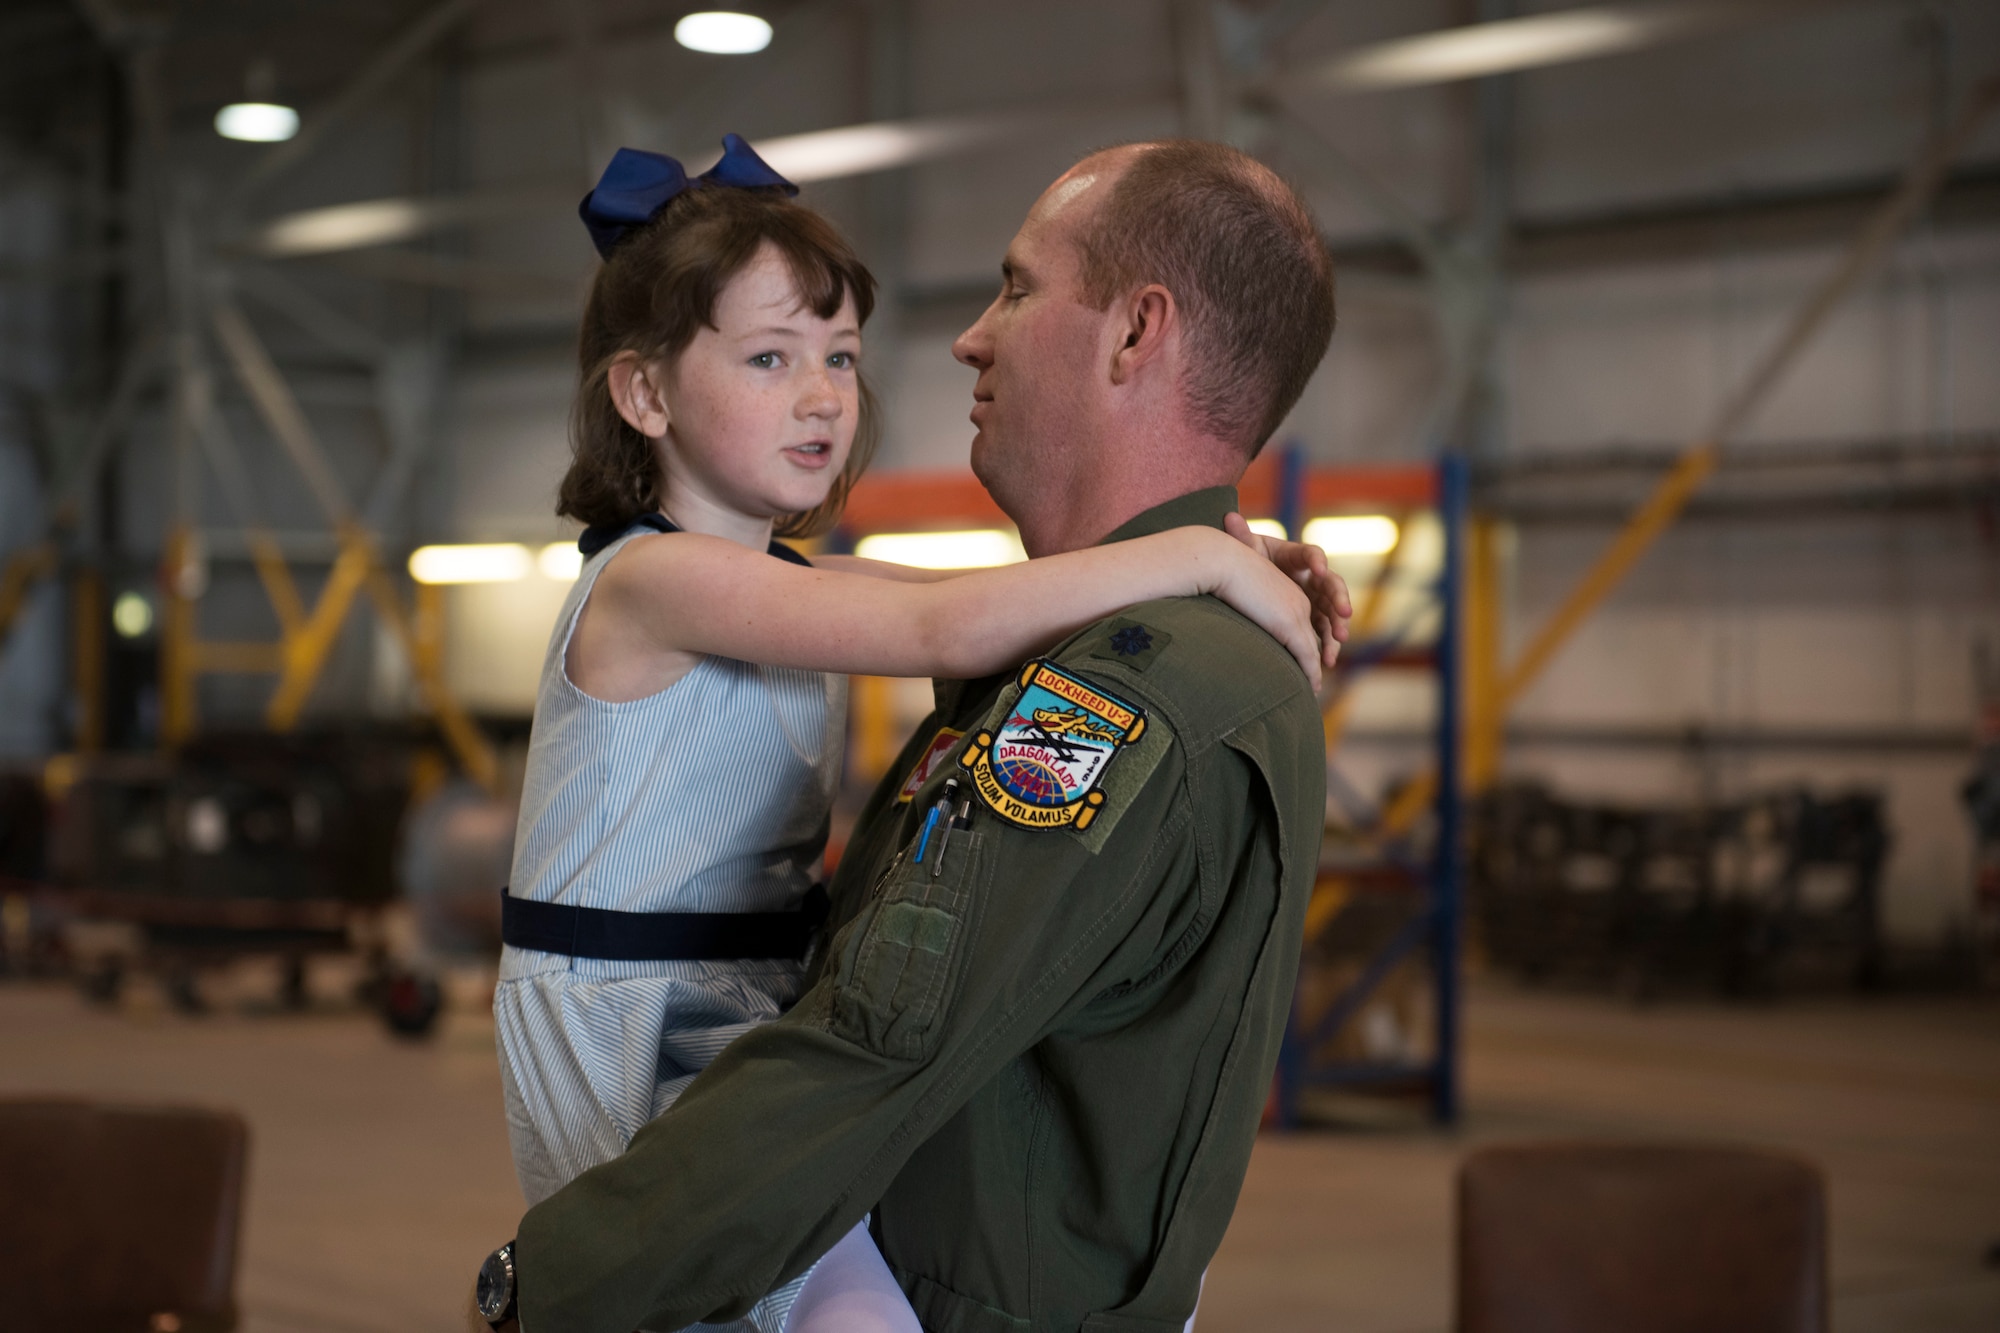 U.S. Air Force Lt. Col. Brian Staniszewski, 99th Expeditionary Reconnaissance Squadron commander, embraces his daughter during a change of command ceremony, at RAF Fairford, England, June 24, 2020. The change of command ceremony is a military tradition that represents a formal transfer of a unit’s authority and responsibility from one commander to another. (U.S. Air Force photo by Airman 1st Class Jennifer Zima)